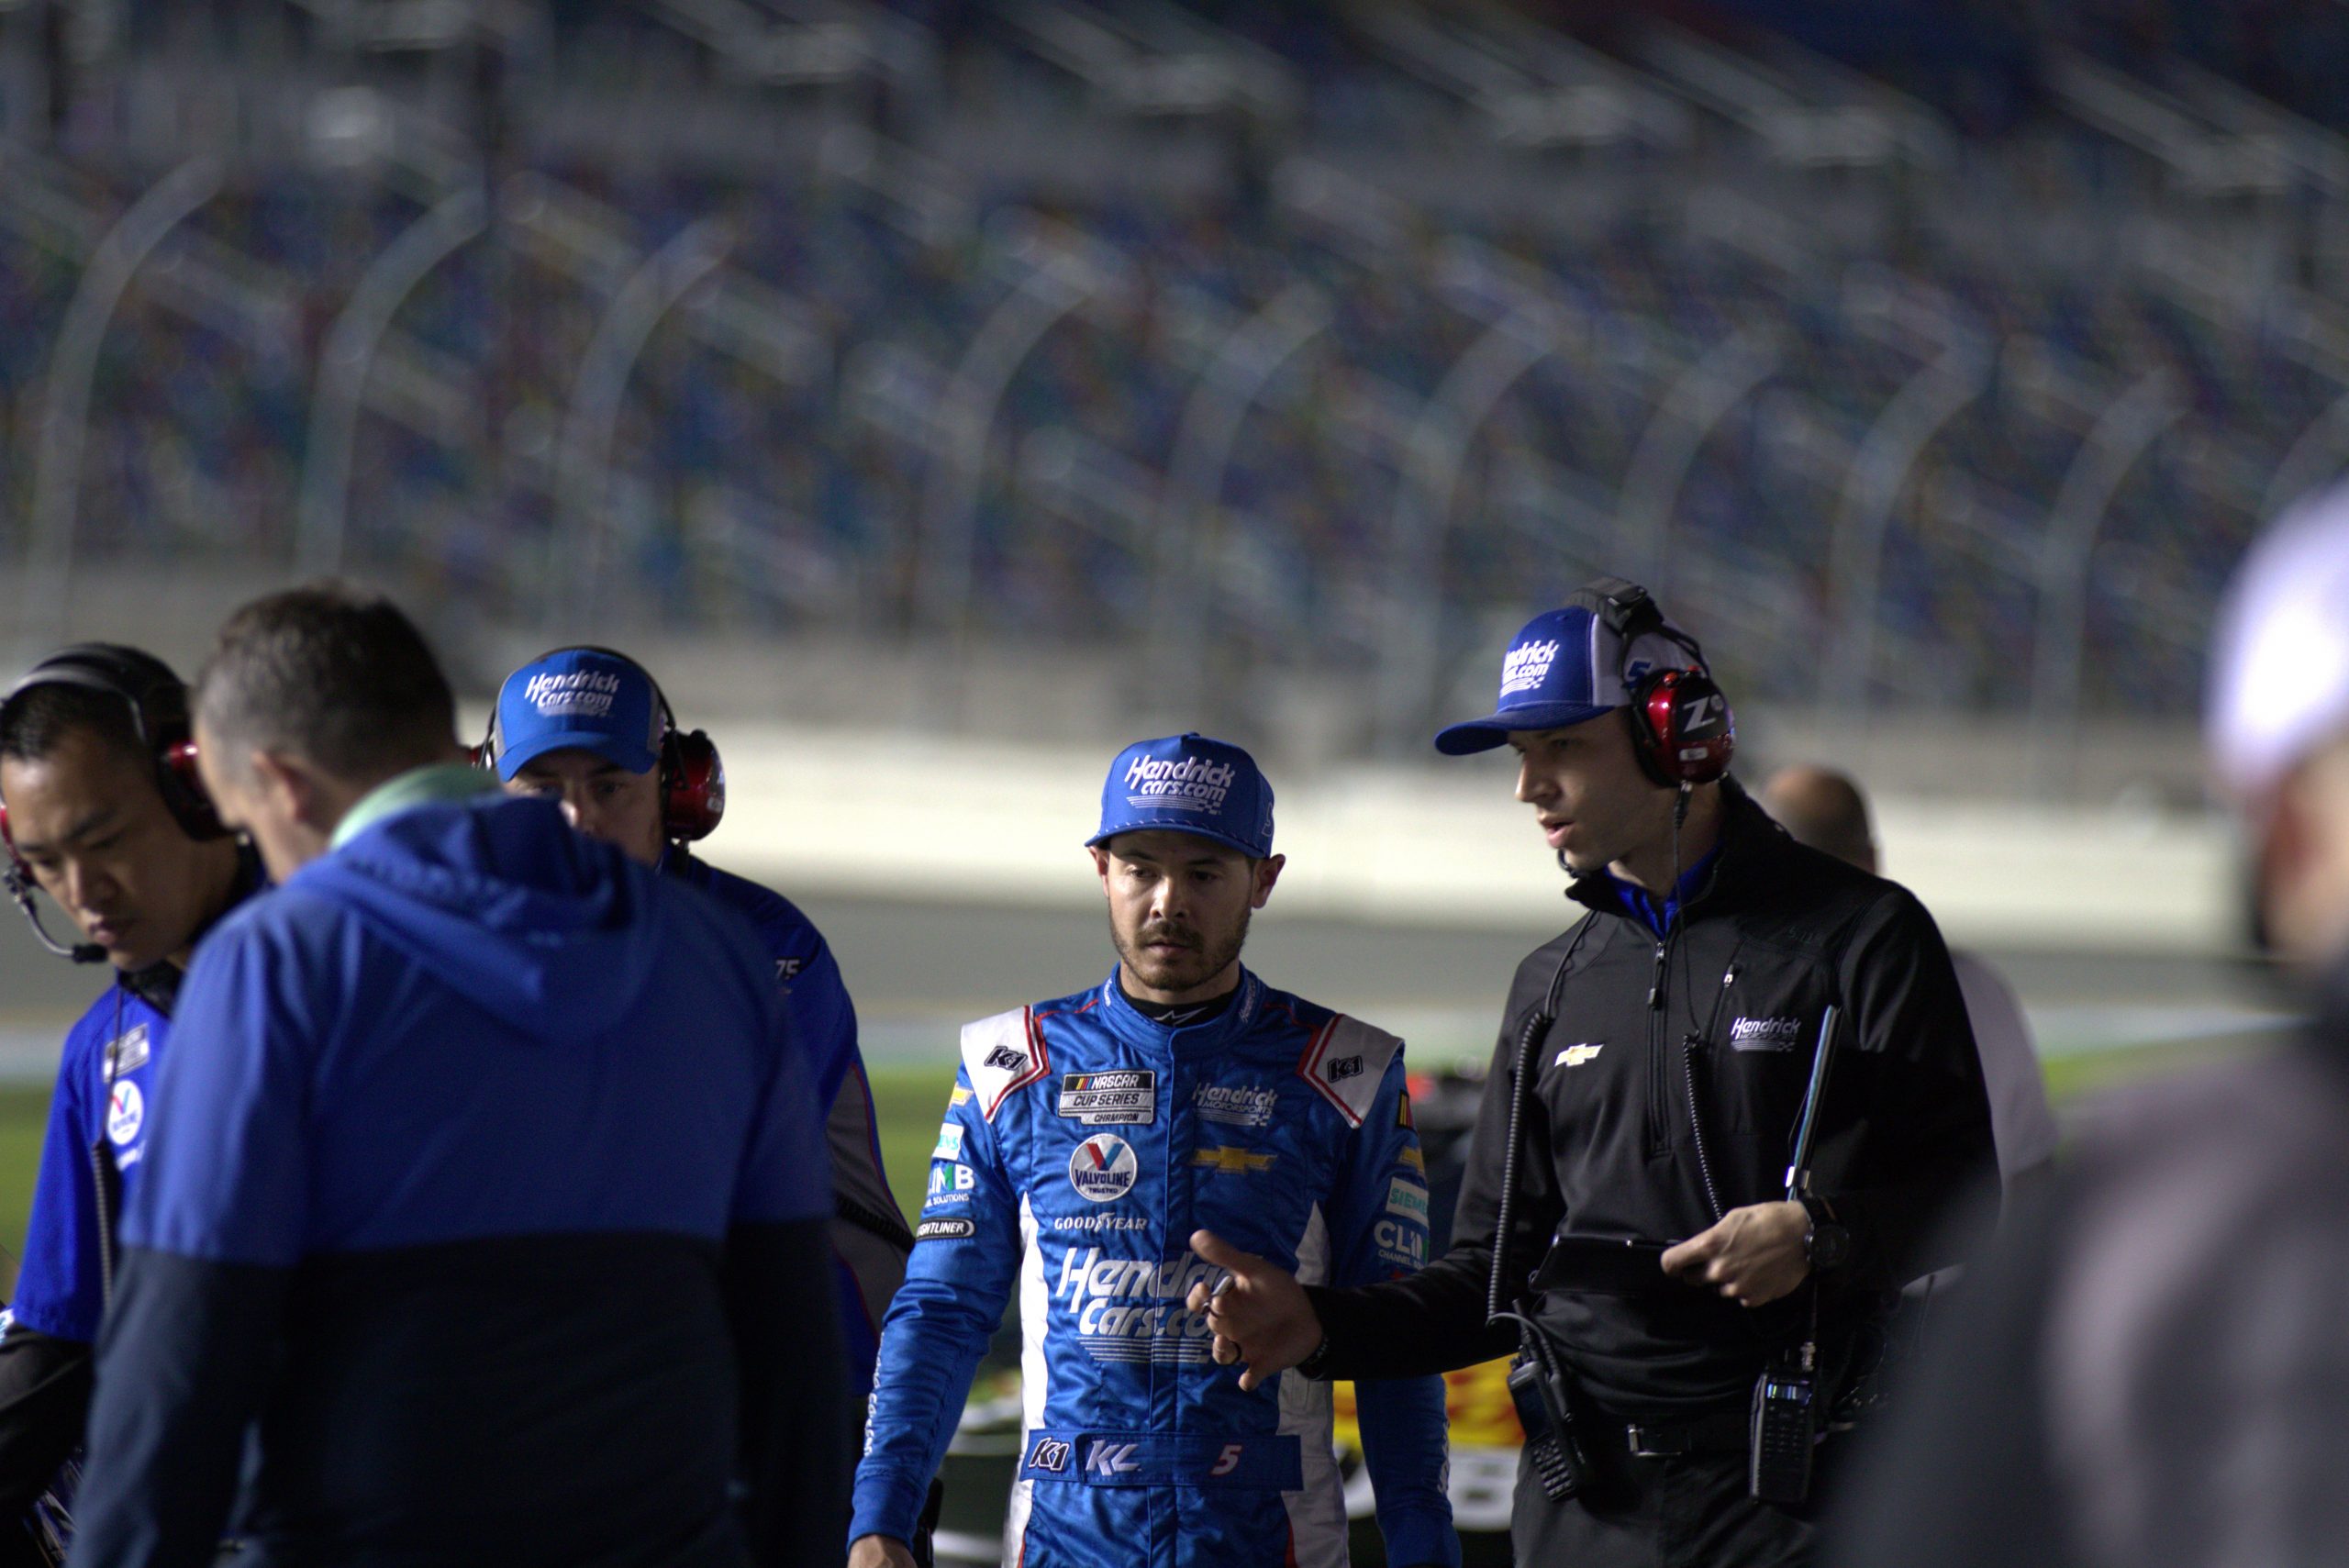 Kyle Larson and Cliff Daniels confer before Wednesday night's front row qualifying session. (Photo: Cornnell Chu | The Podium Finish)